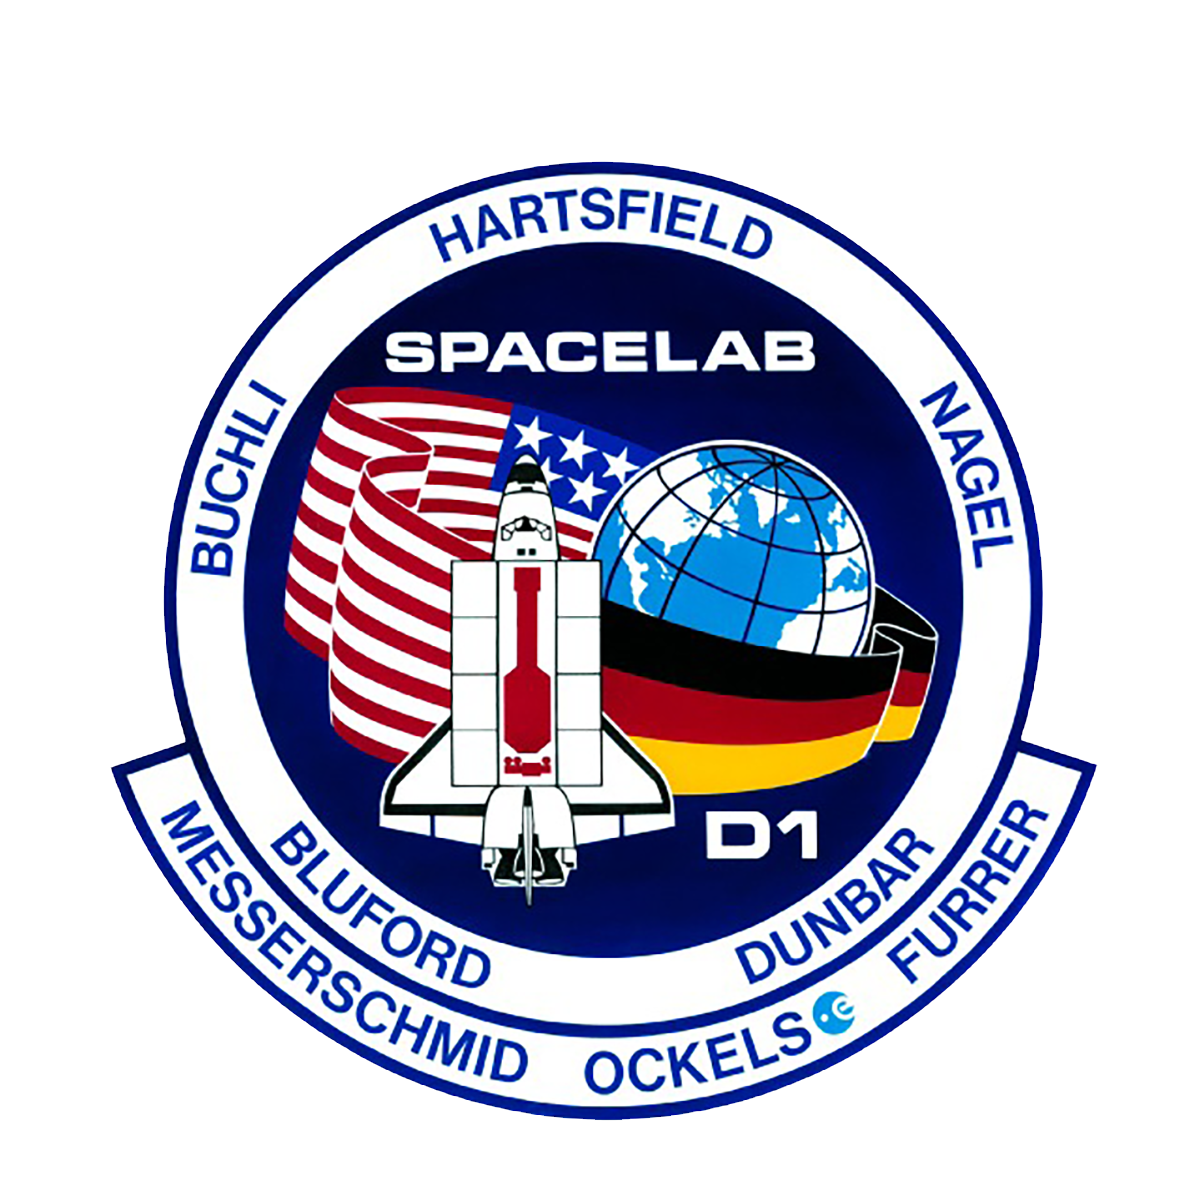 STS-61-A (Challenger)